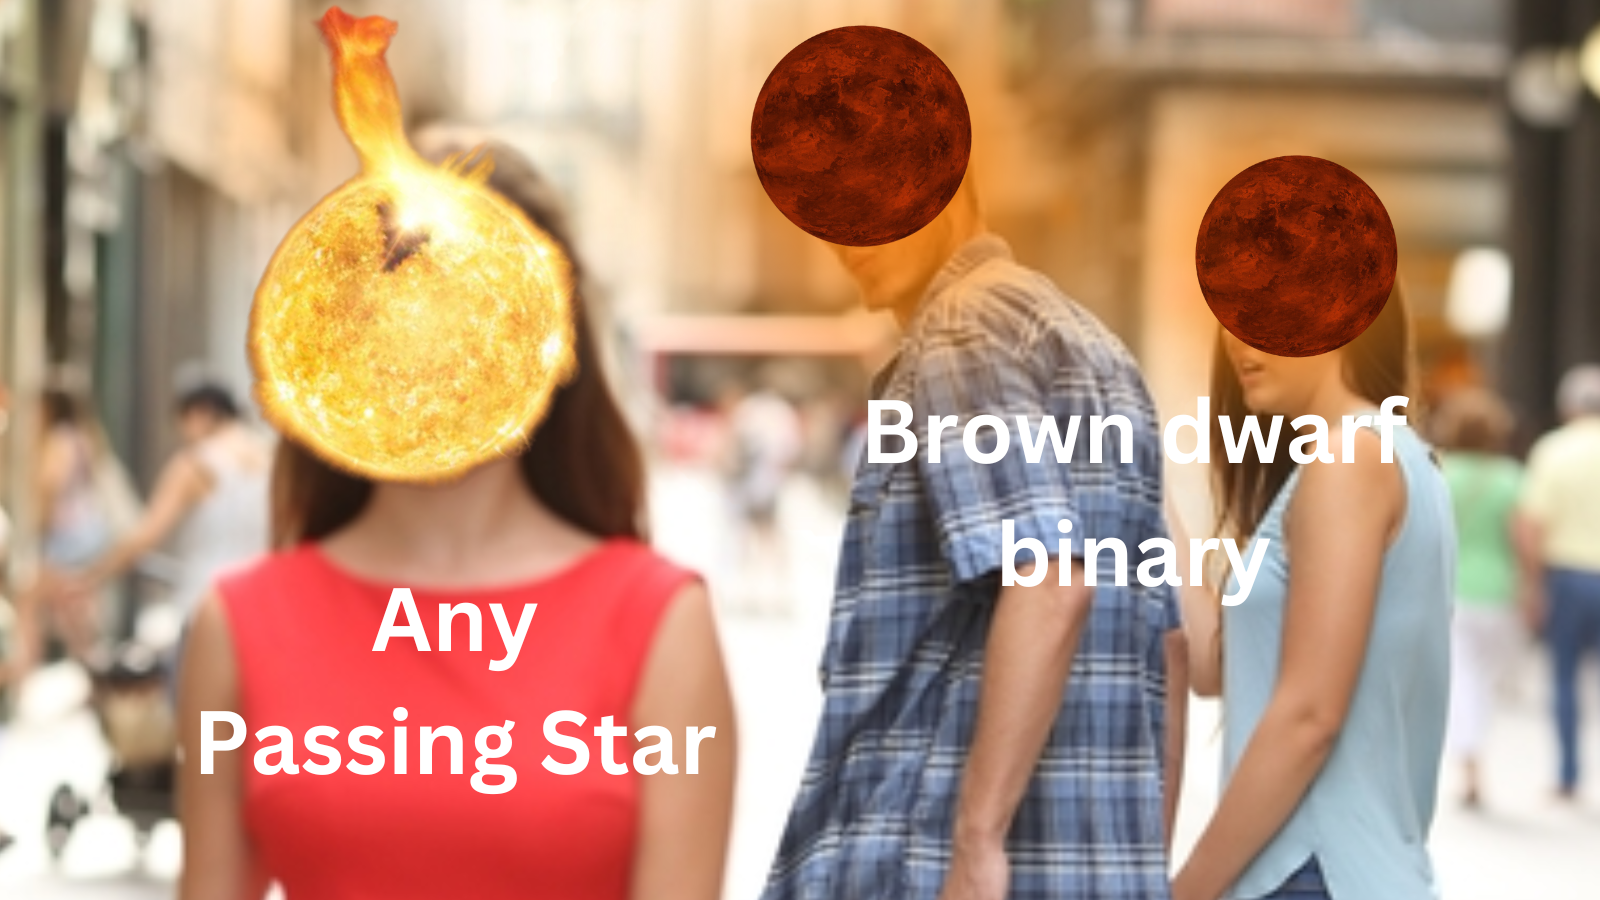 A meme with two people holding hands in the far ground, each with a brown dwarf illustration covering their face. A person in the foreground has a star illustration on her face. The boy brown dwarf is distracted from the girl brown dwarf because he's looking at the star girl.